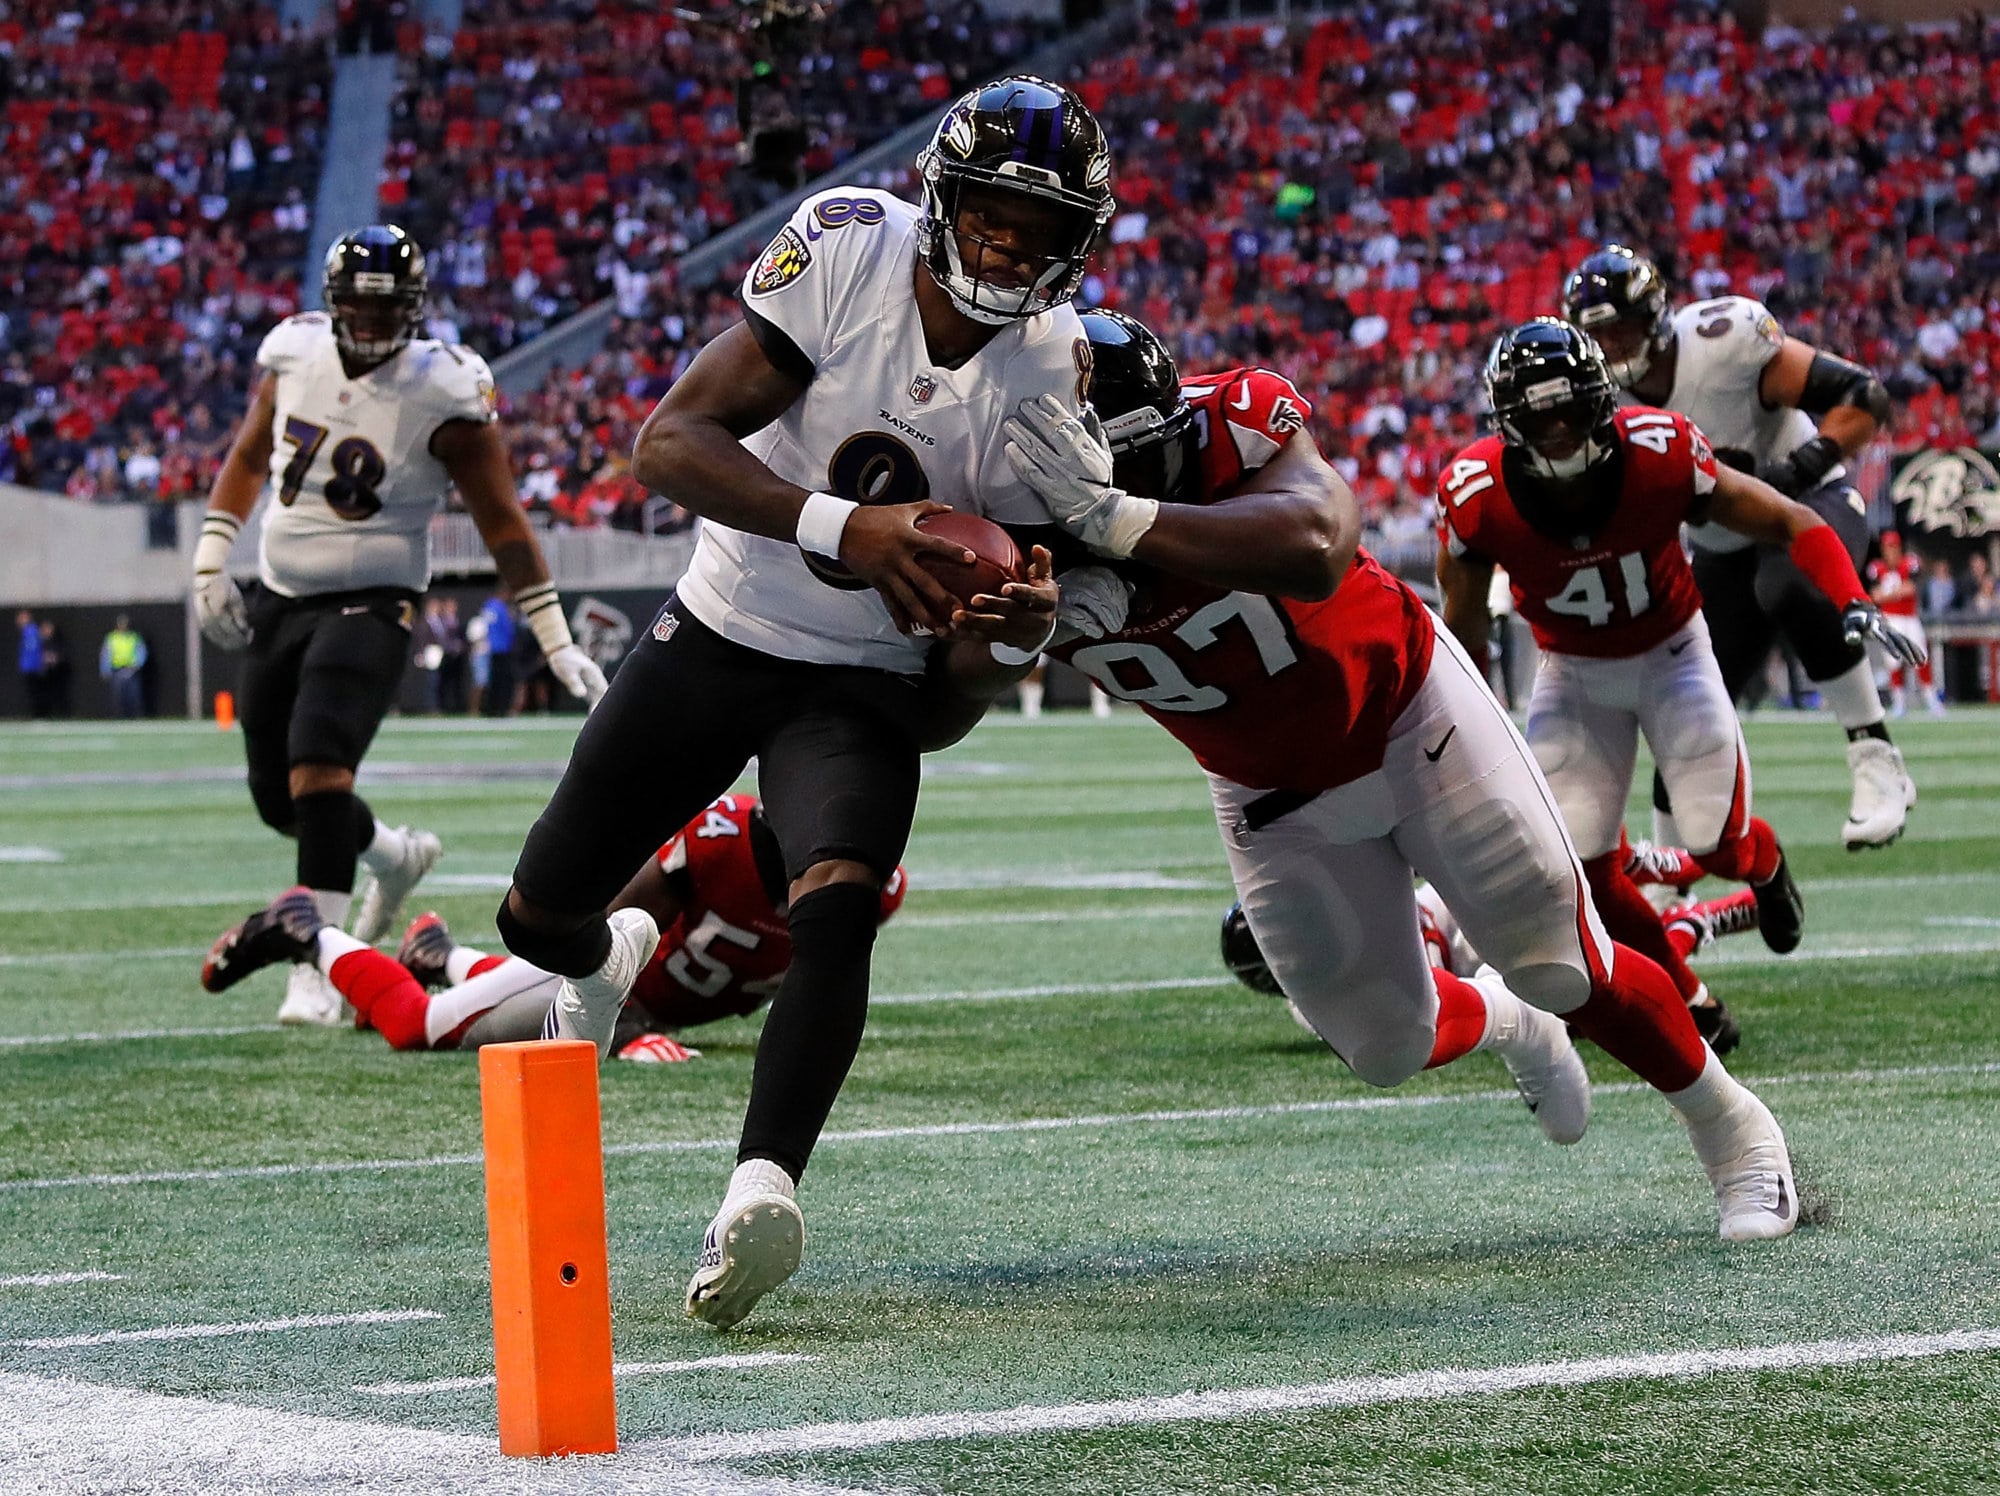 ATLANTA, GA - DECEMBER 02:  Lamar Jackson #8 of the Baltimore Ravens rushes for a touchdown past Grady Jarrett #97 of the Atlanta Falcons at Mercedes-Benz Stadium on December 2, 2018 in Atlanta, Georgia.  (Photo by Kevin C. Cox/Getty Images)